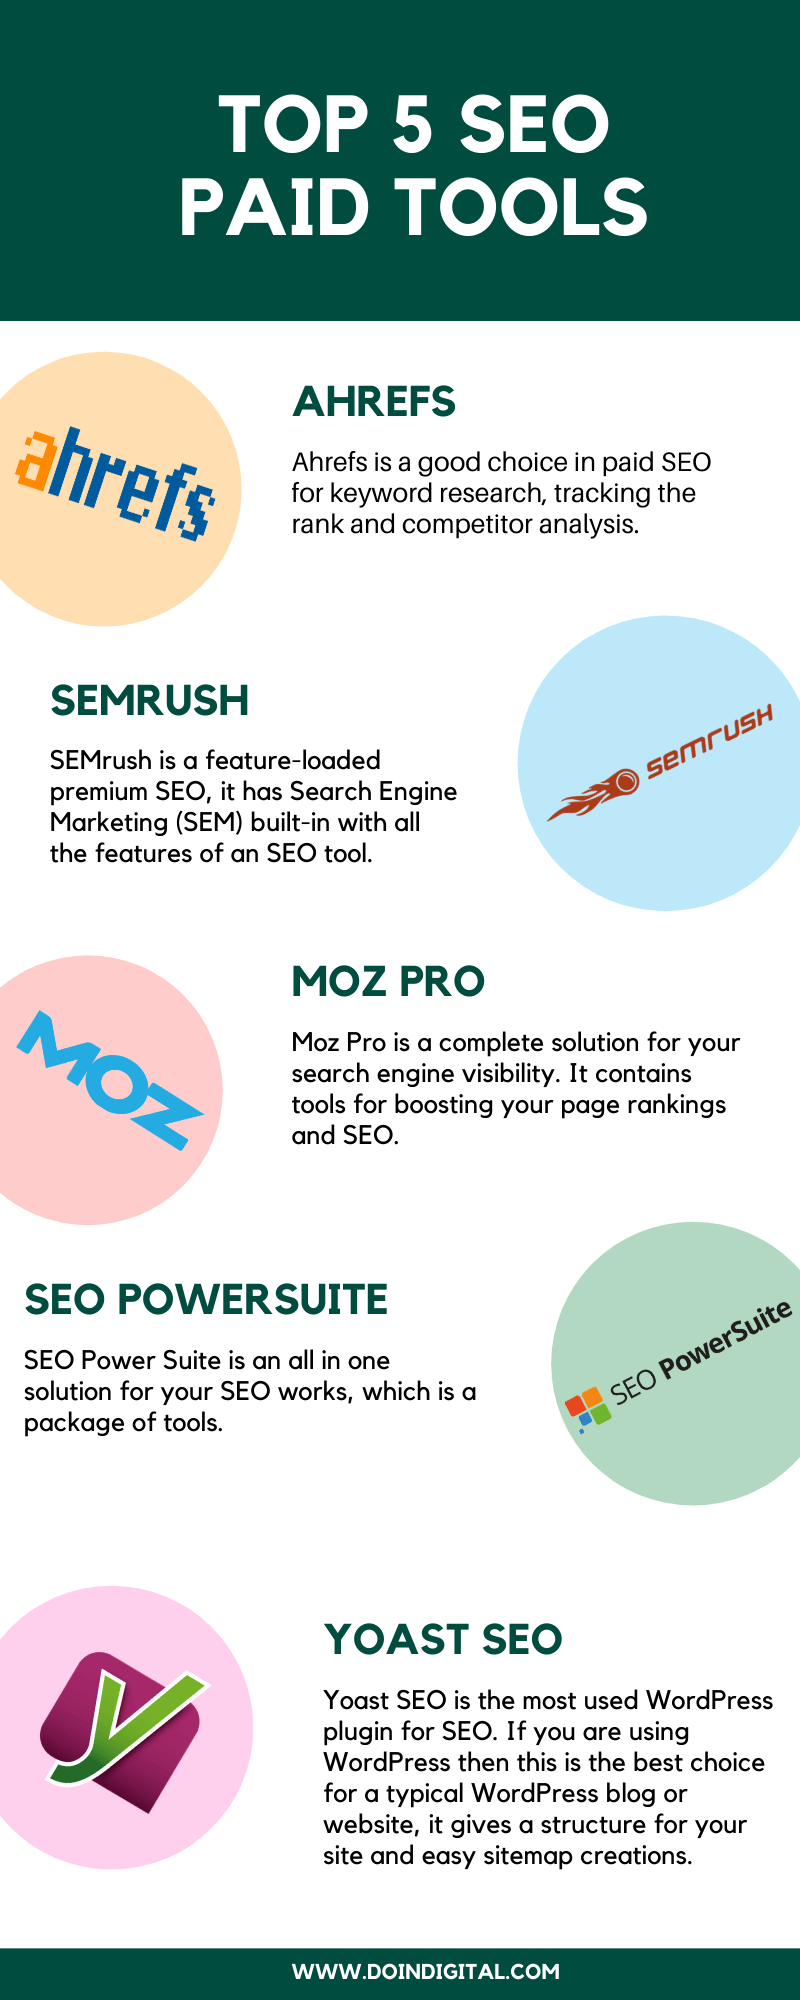 top-5-seo-paid-tools-infographic